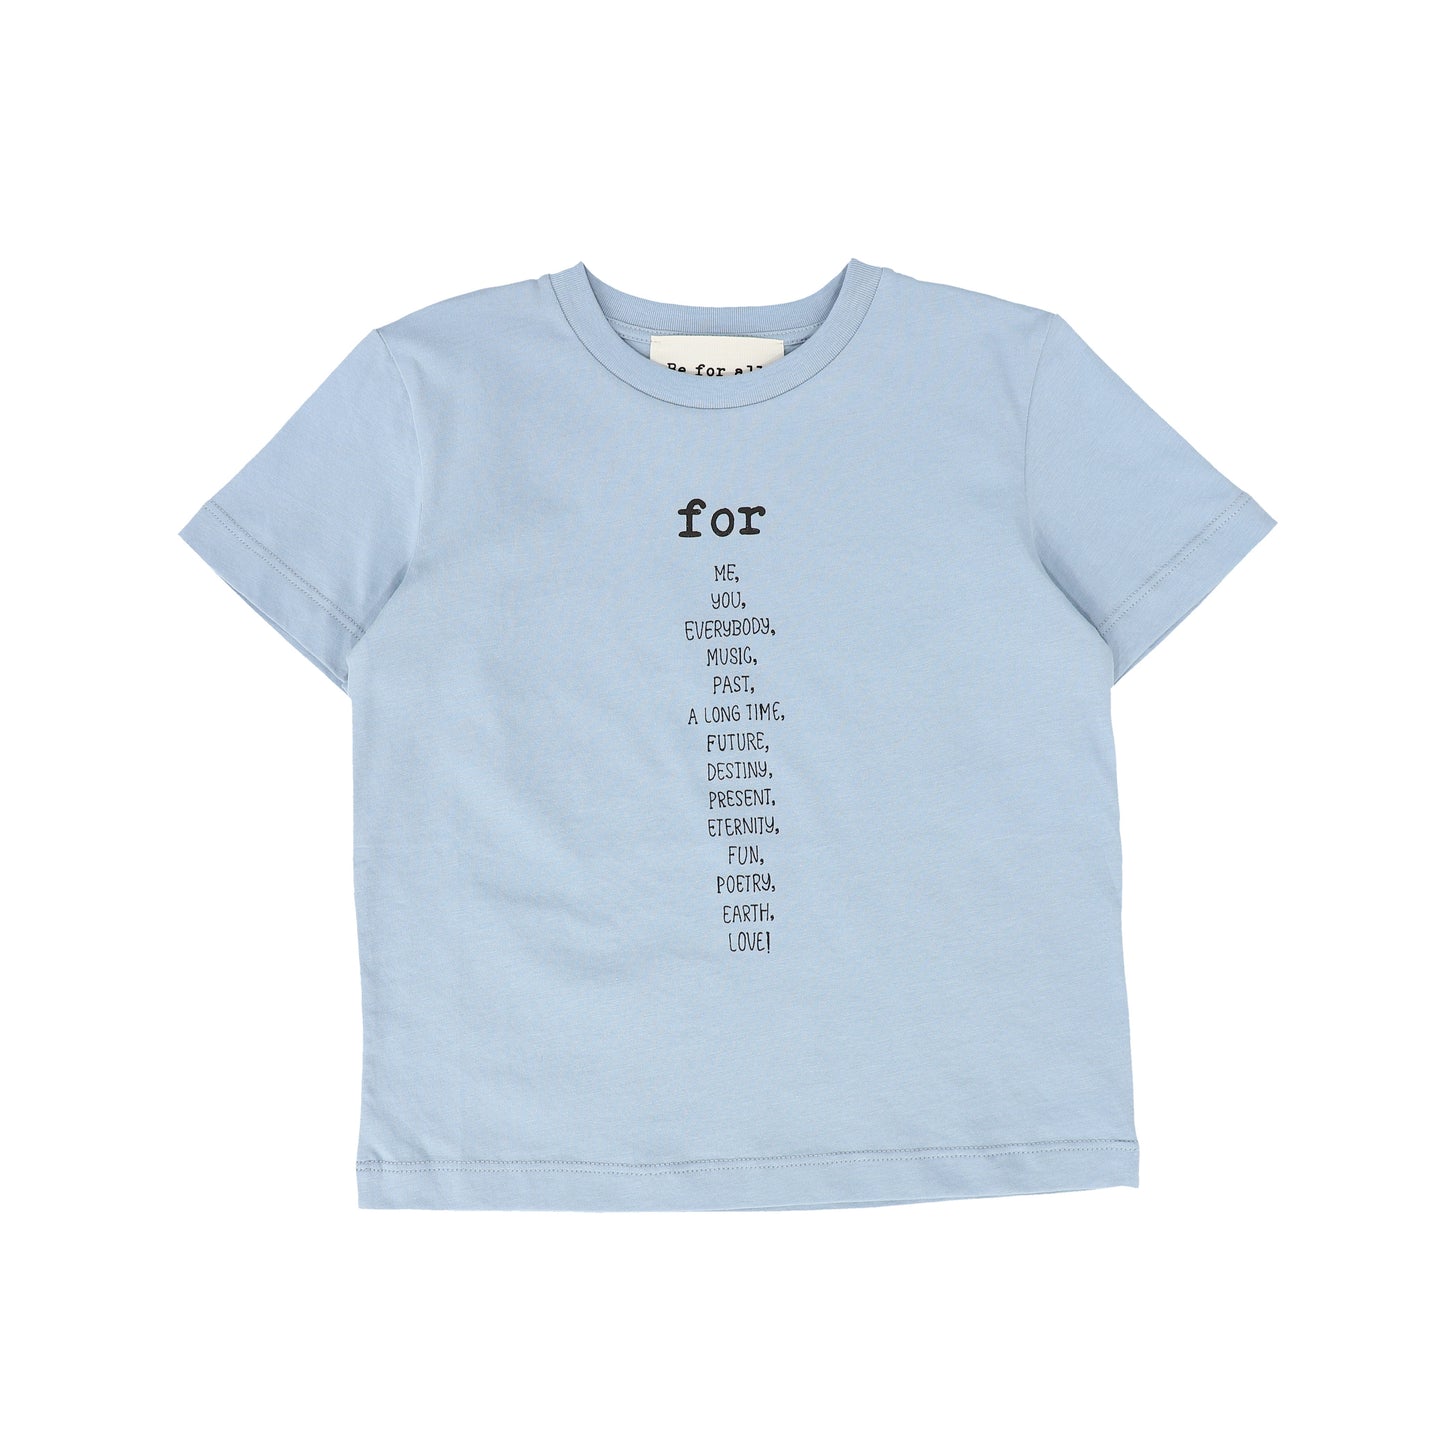 BE FOR ALL BLUE WORDED TEE